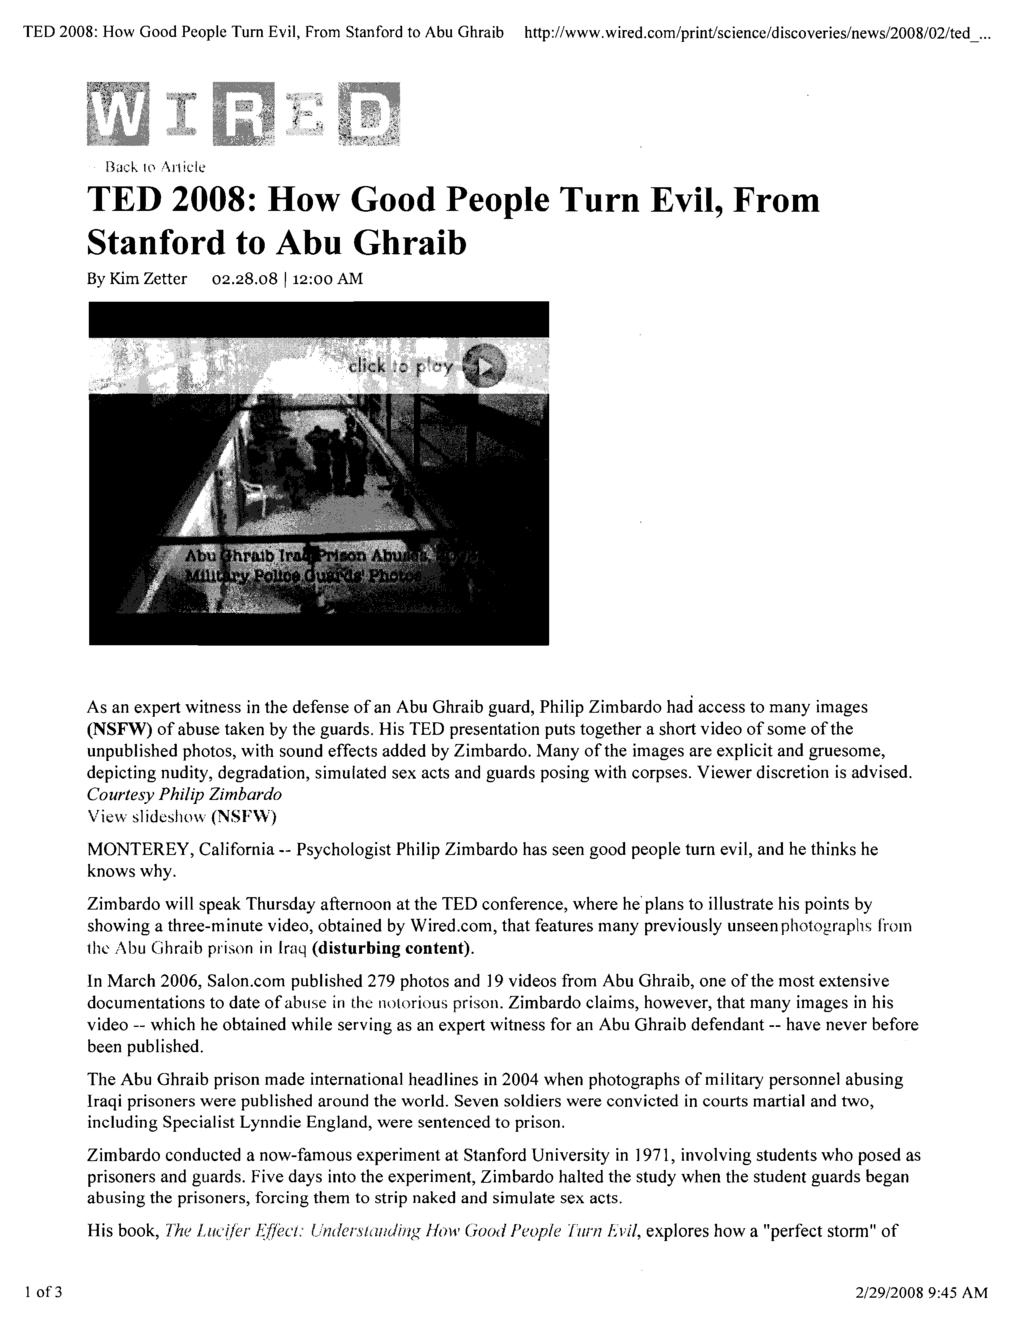 TED 2008: How Good People Tum Evil, From Stanford to Abu Ghraib http://www.wired.com/print/science/discoveries/news/2008/02/ted_.